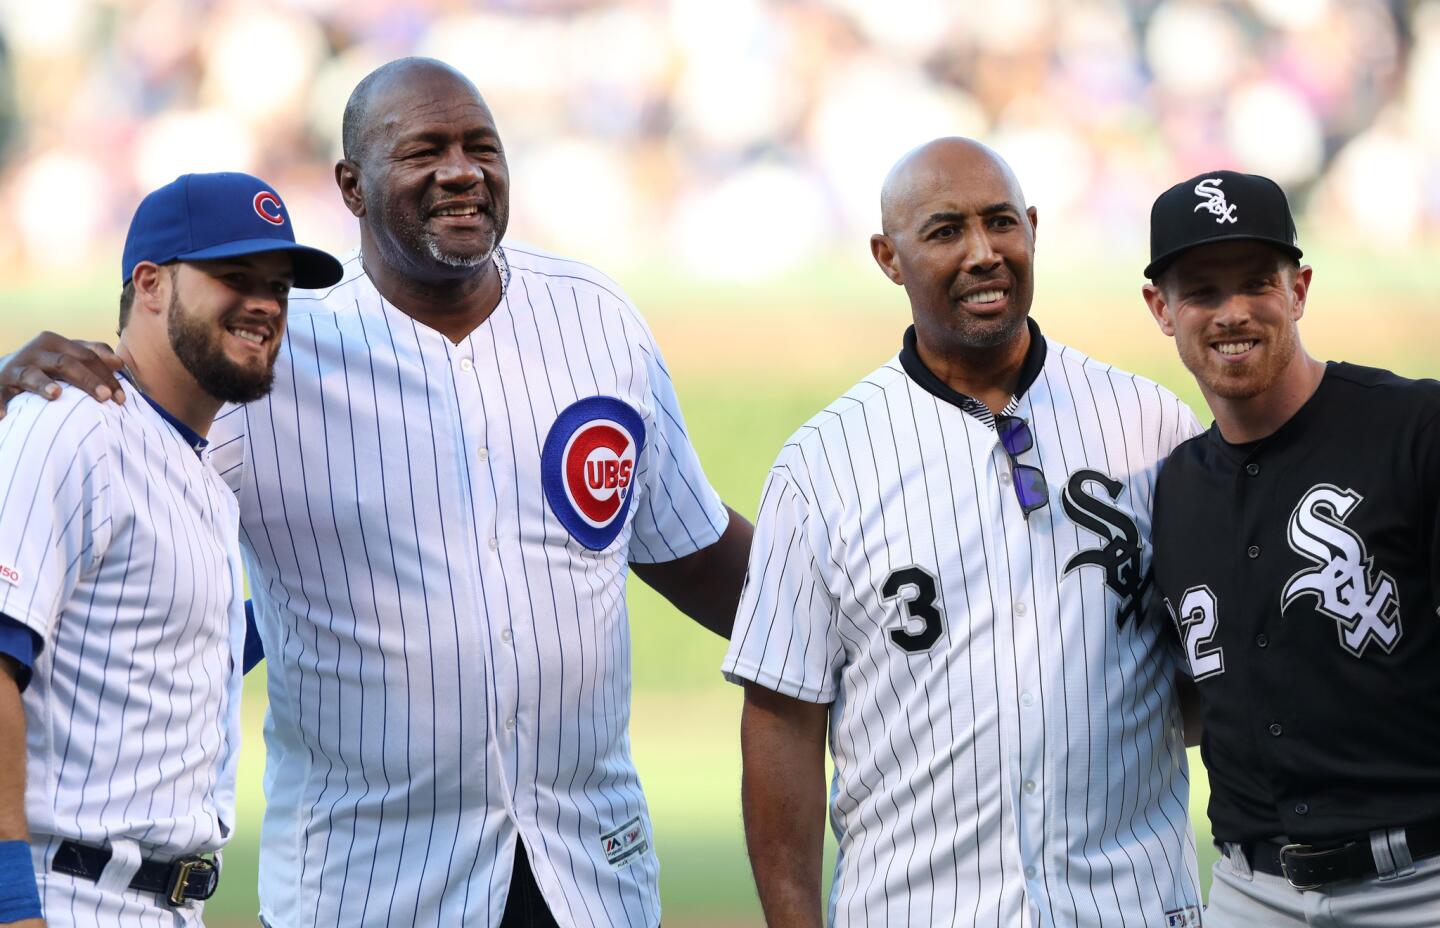 Former Cubs player Lee Smith and former Chicago White Sox player Harold Baines pose for photographs after both threw out ceremonial first pitches before a Cubs-White Sox game at Wrigley Field on June 18, 2019.